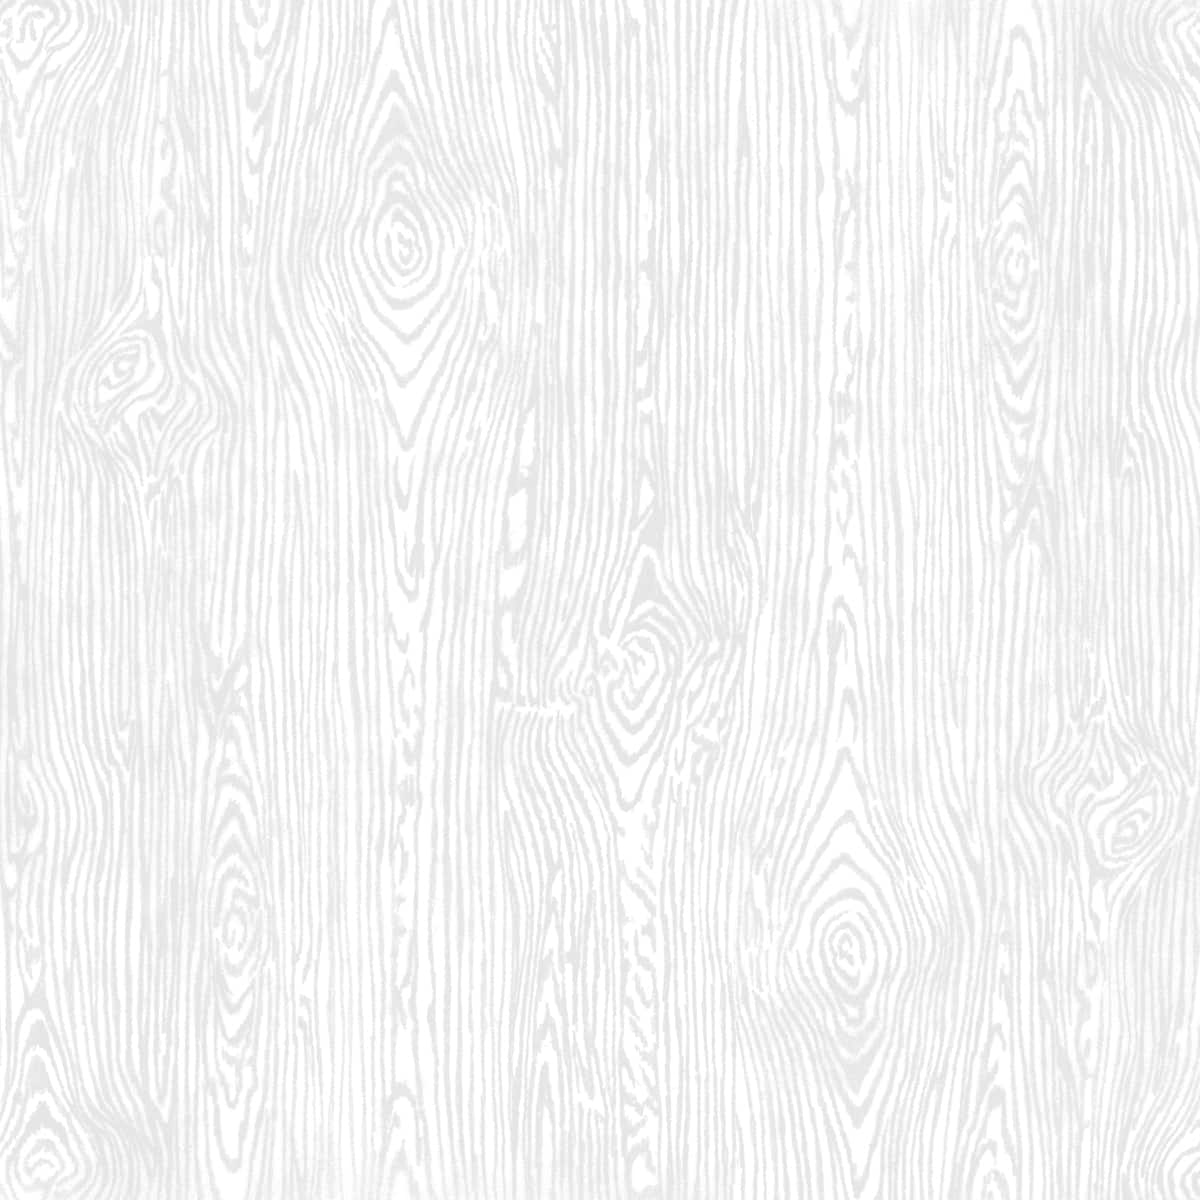 American Crafts 12 x 12 in. Cardstock - Textured White